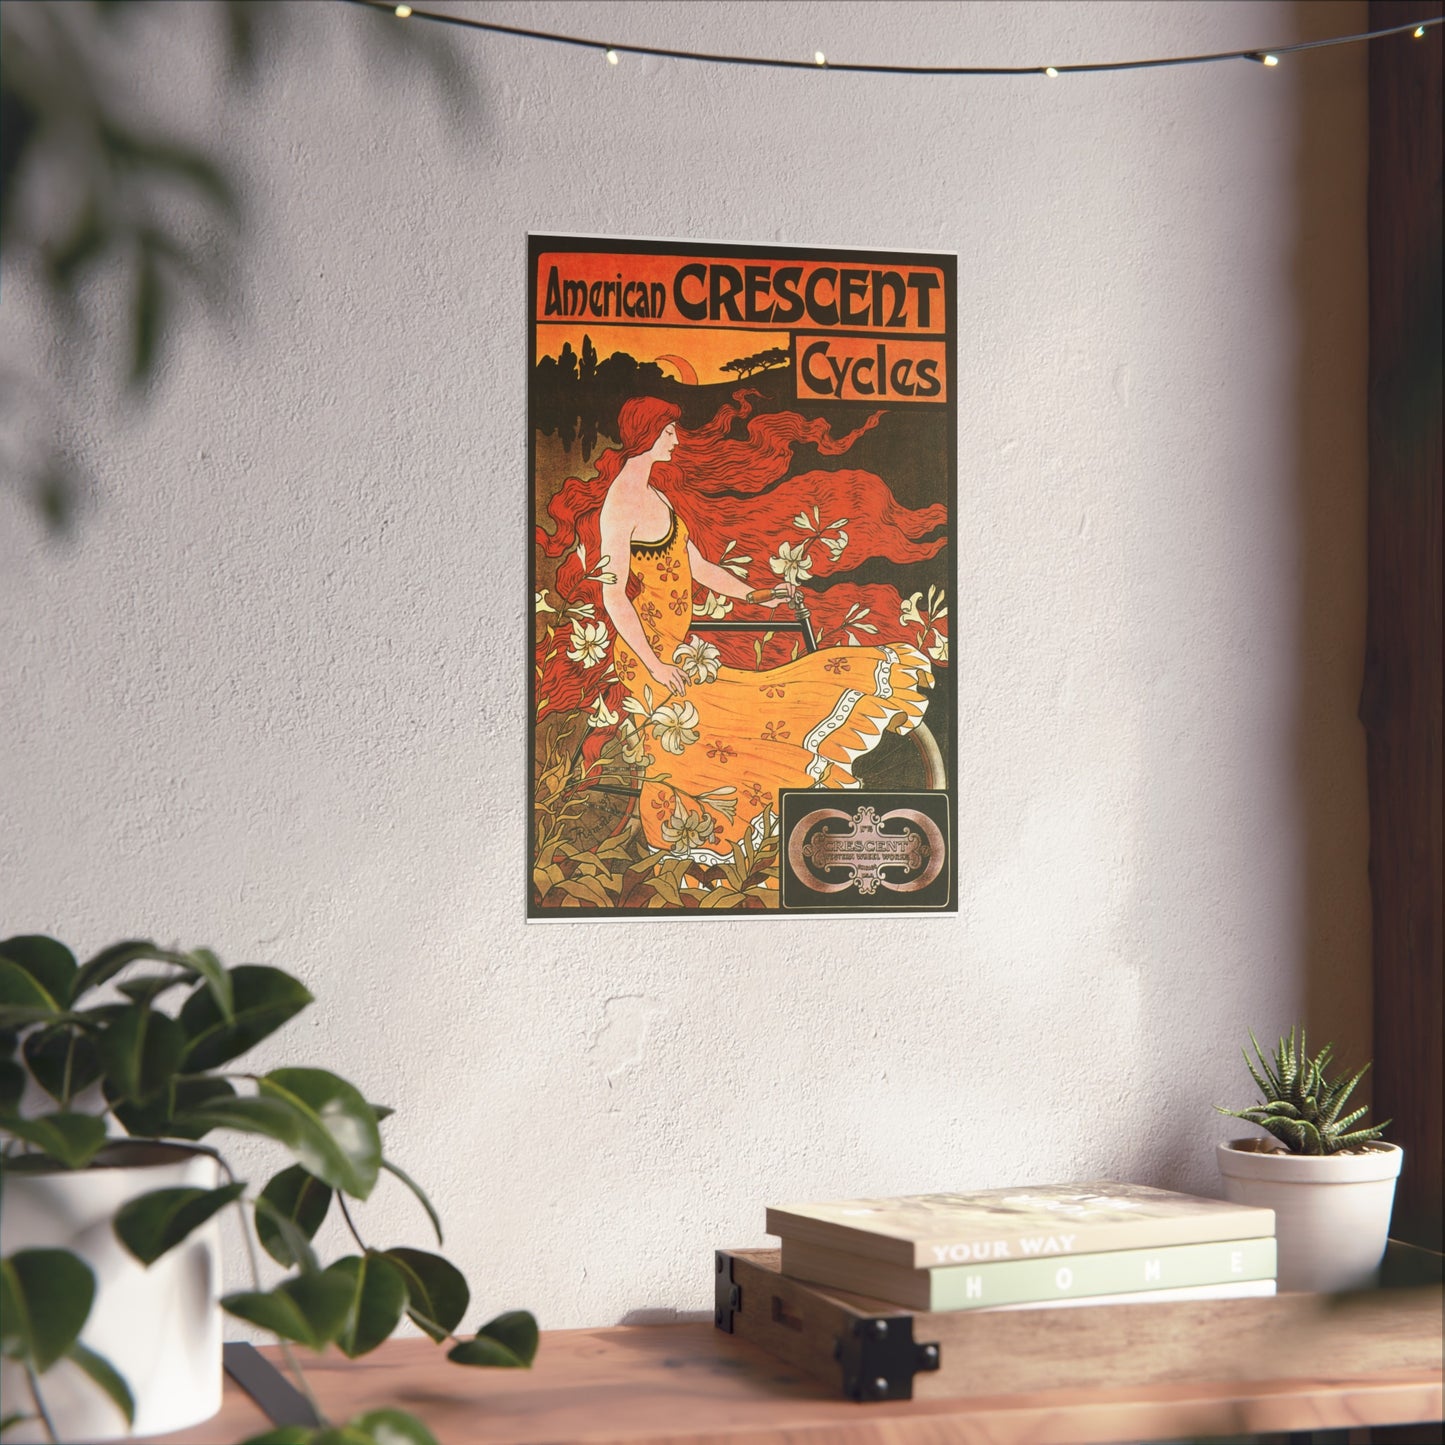 American Crescent Cycles - Vintage Bicycle Poster